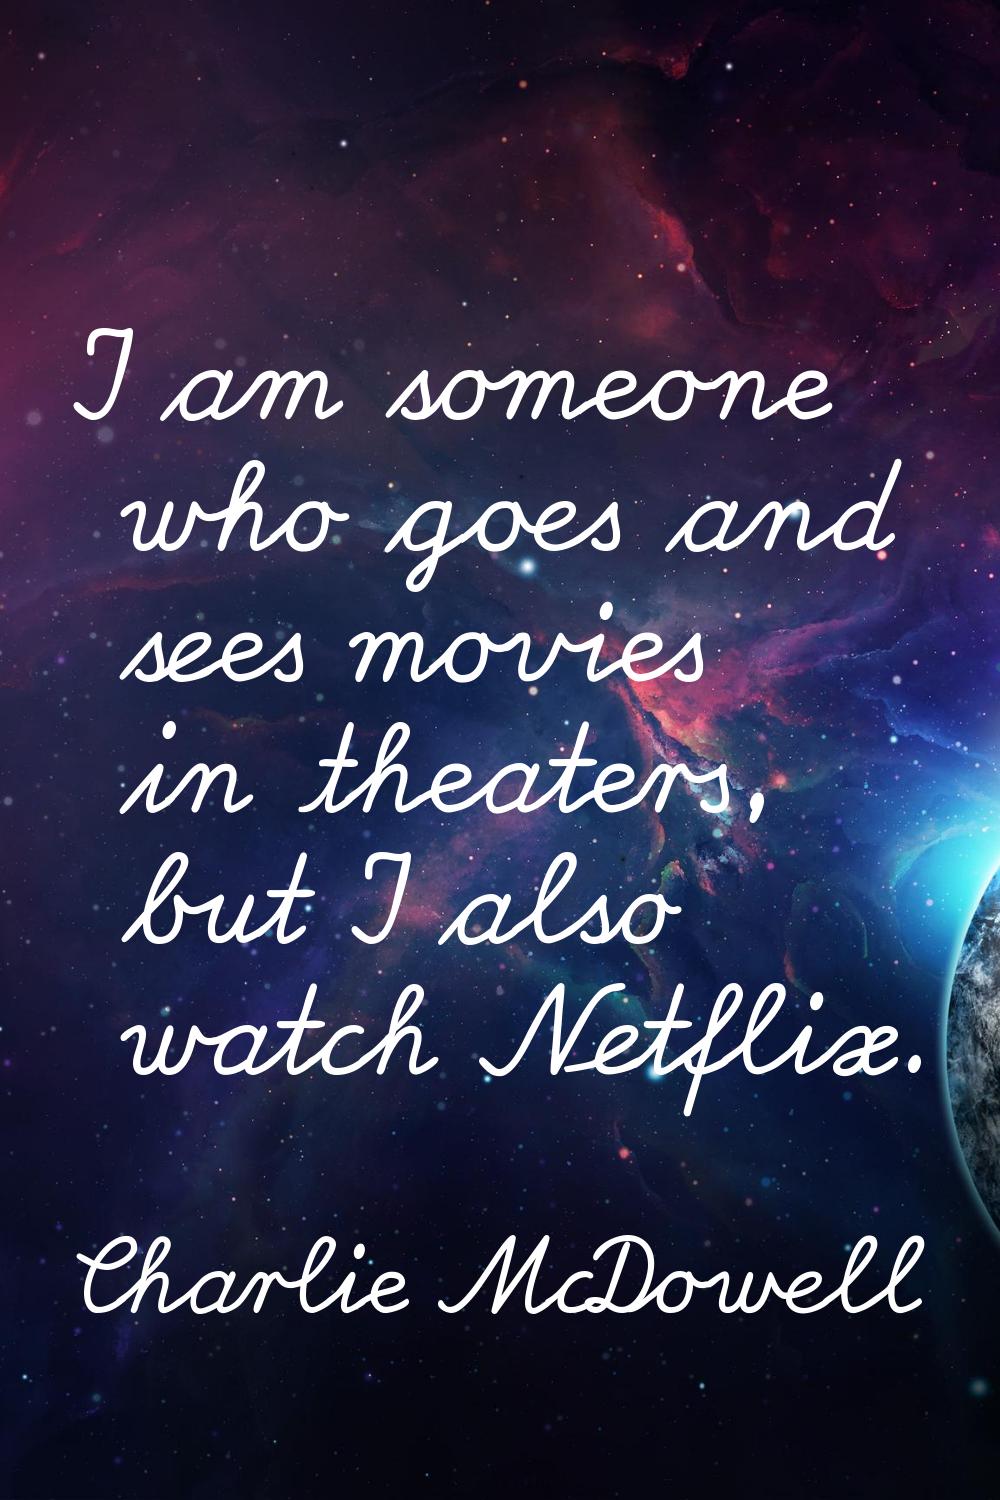 I am someone who goes and sees movies in theaters, but I also watch Netflix.